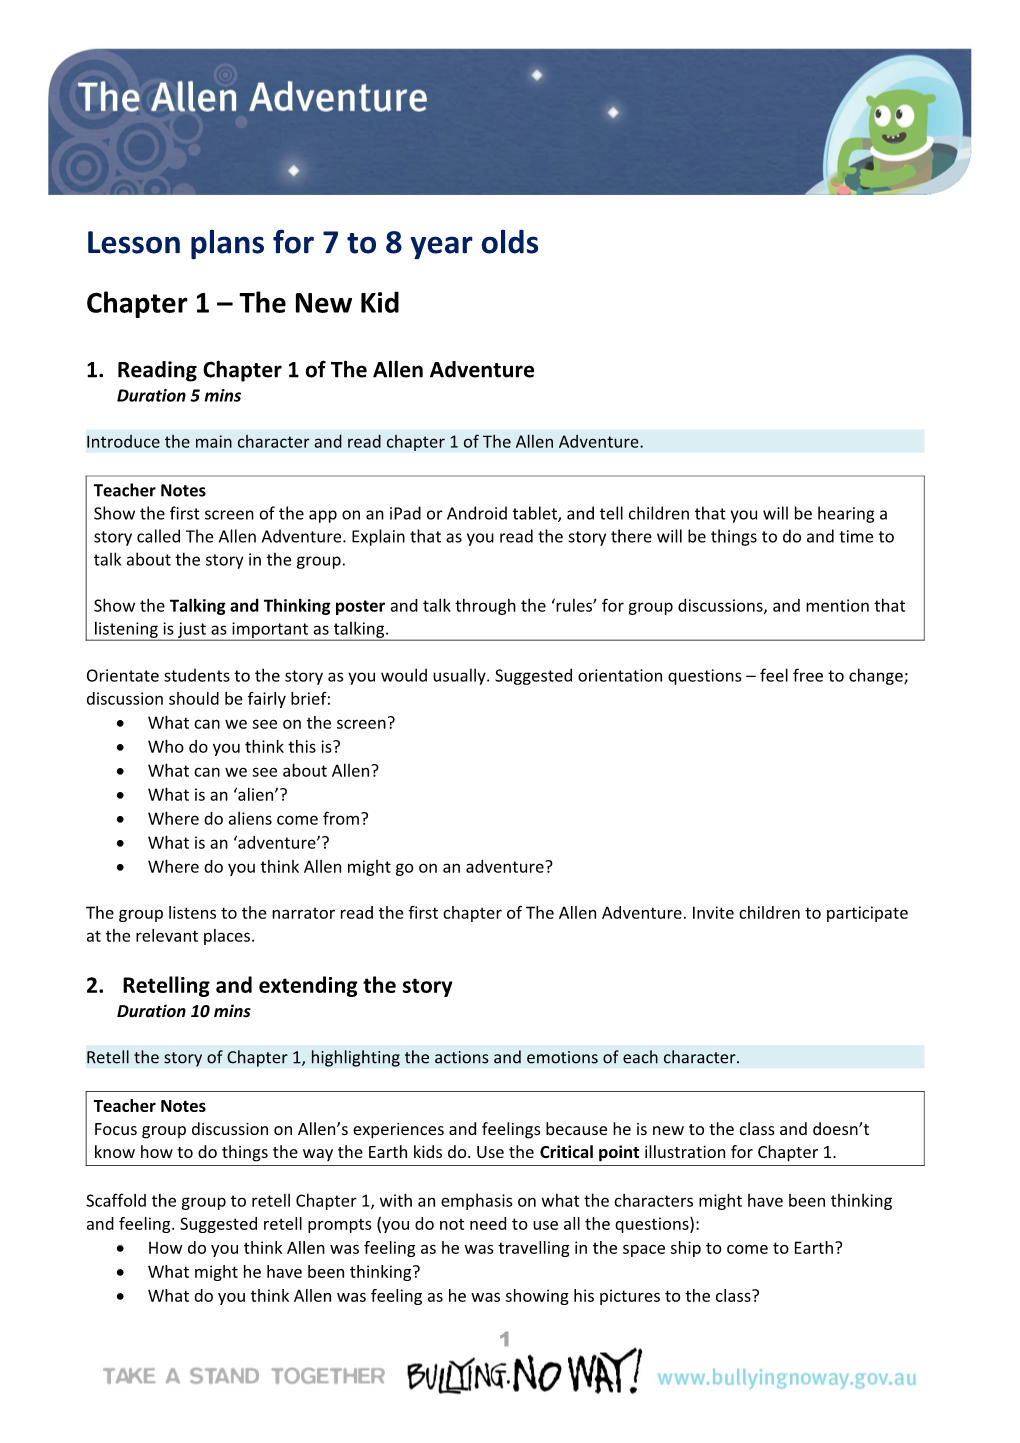 Lesson Plans for 7 to 8 Year Olds